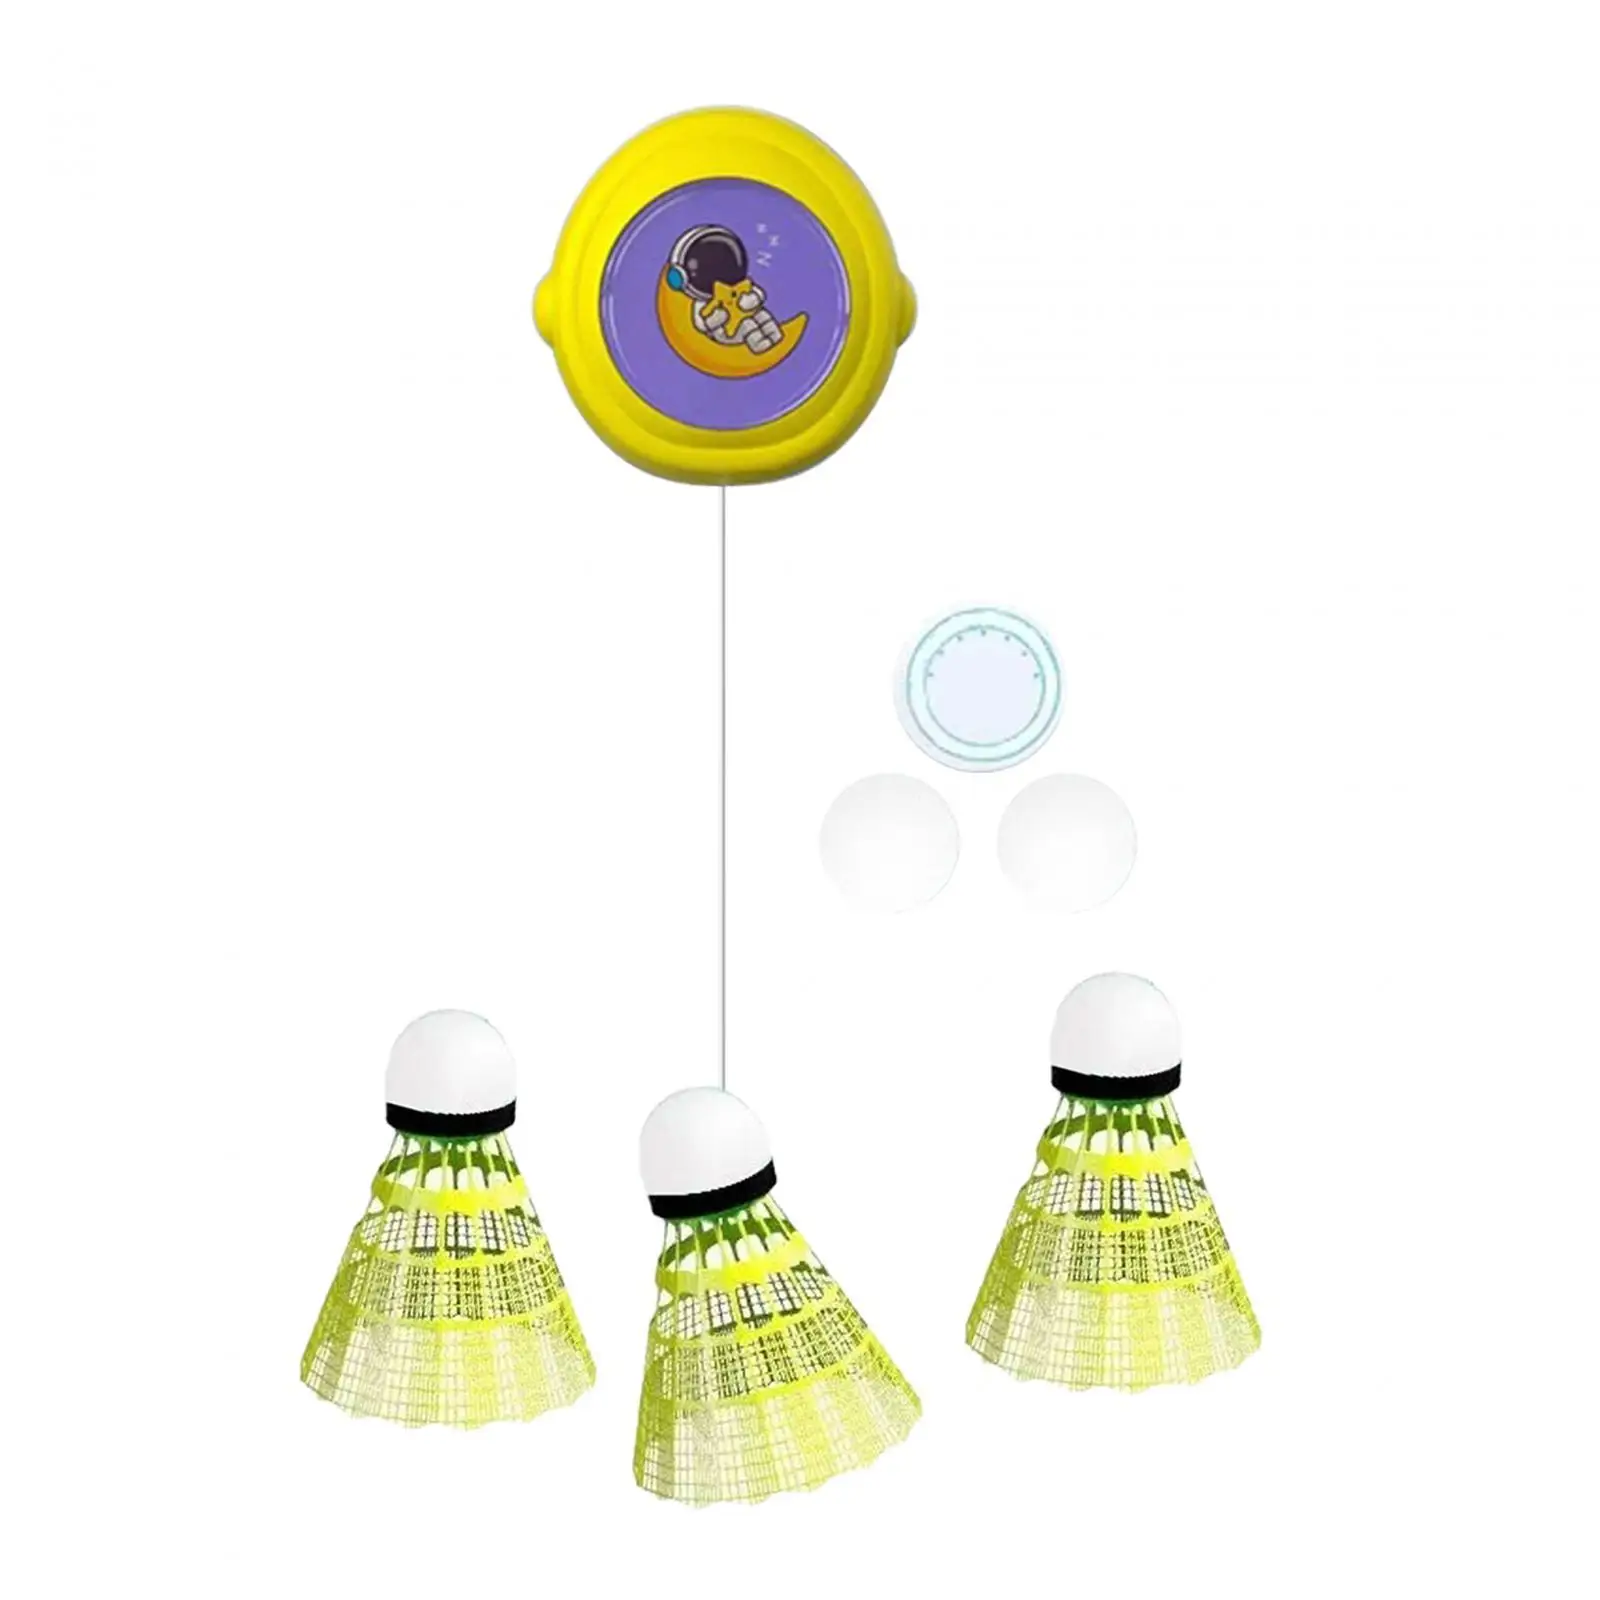 Hanging Badminton Trainer Interactive Toys Strength Training Self Training Device for Game Games Fitness Exercise Workout